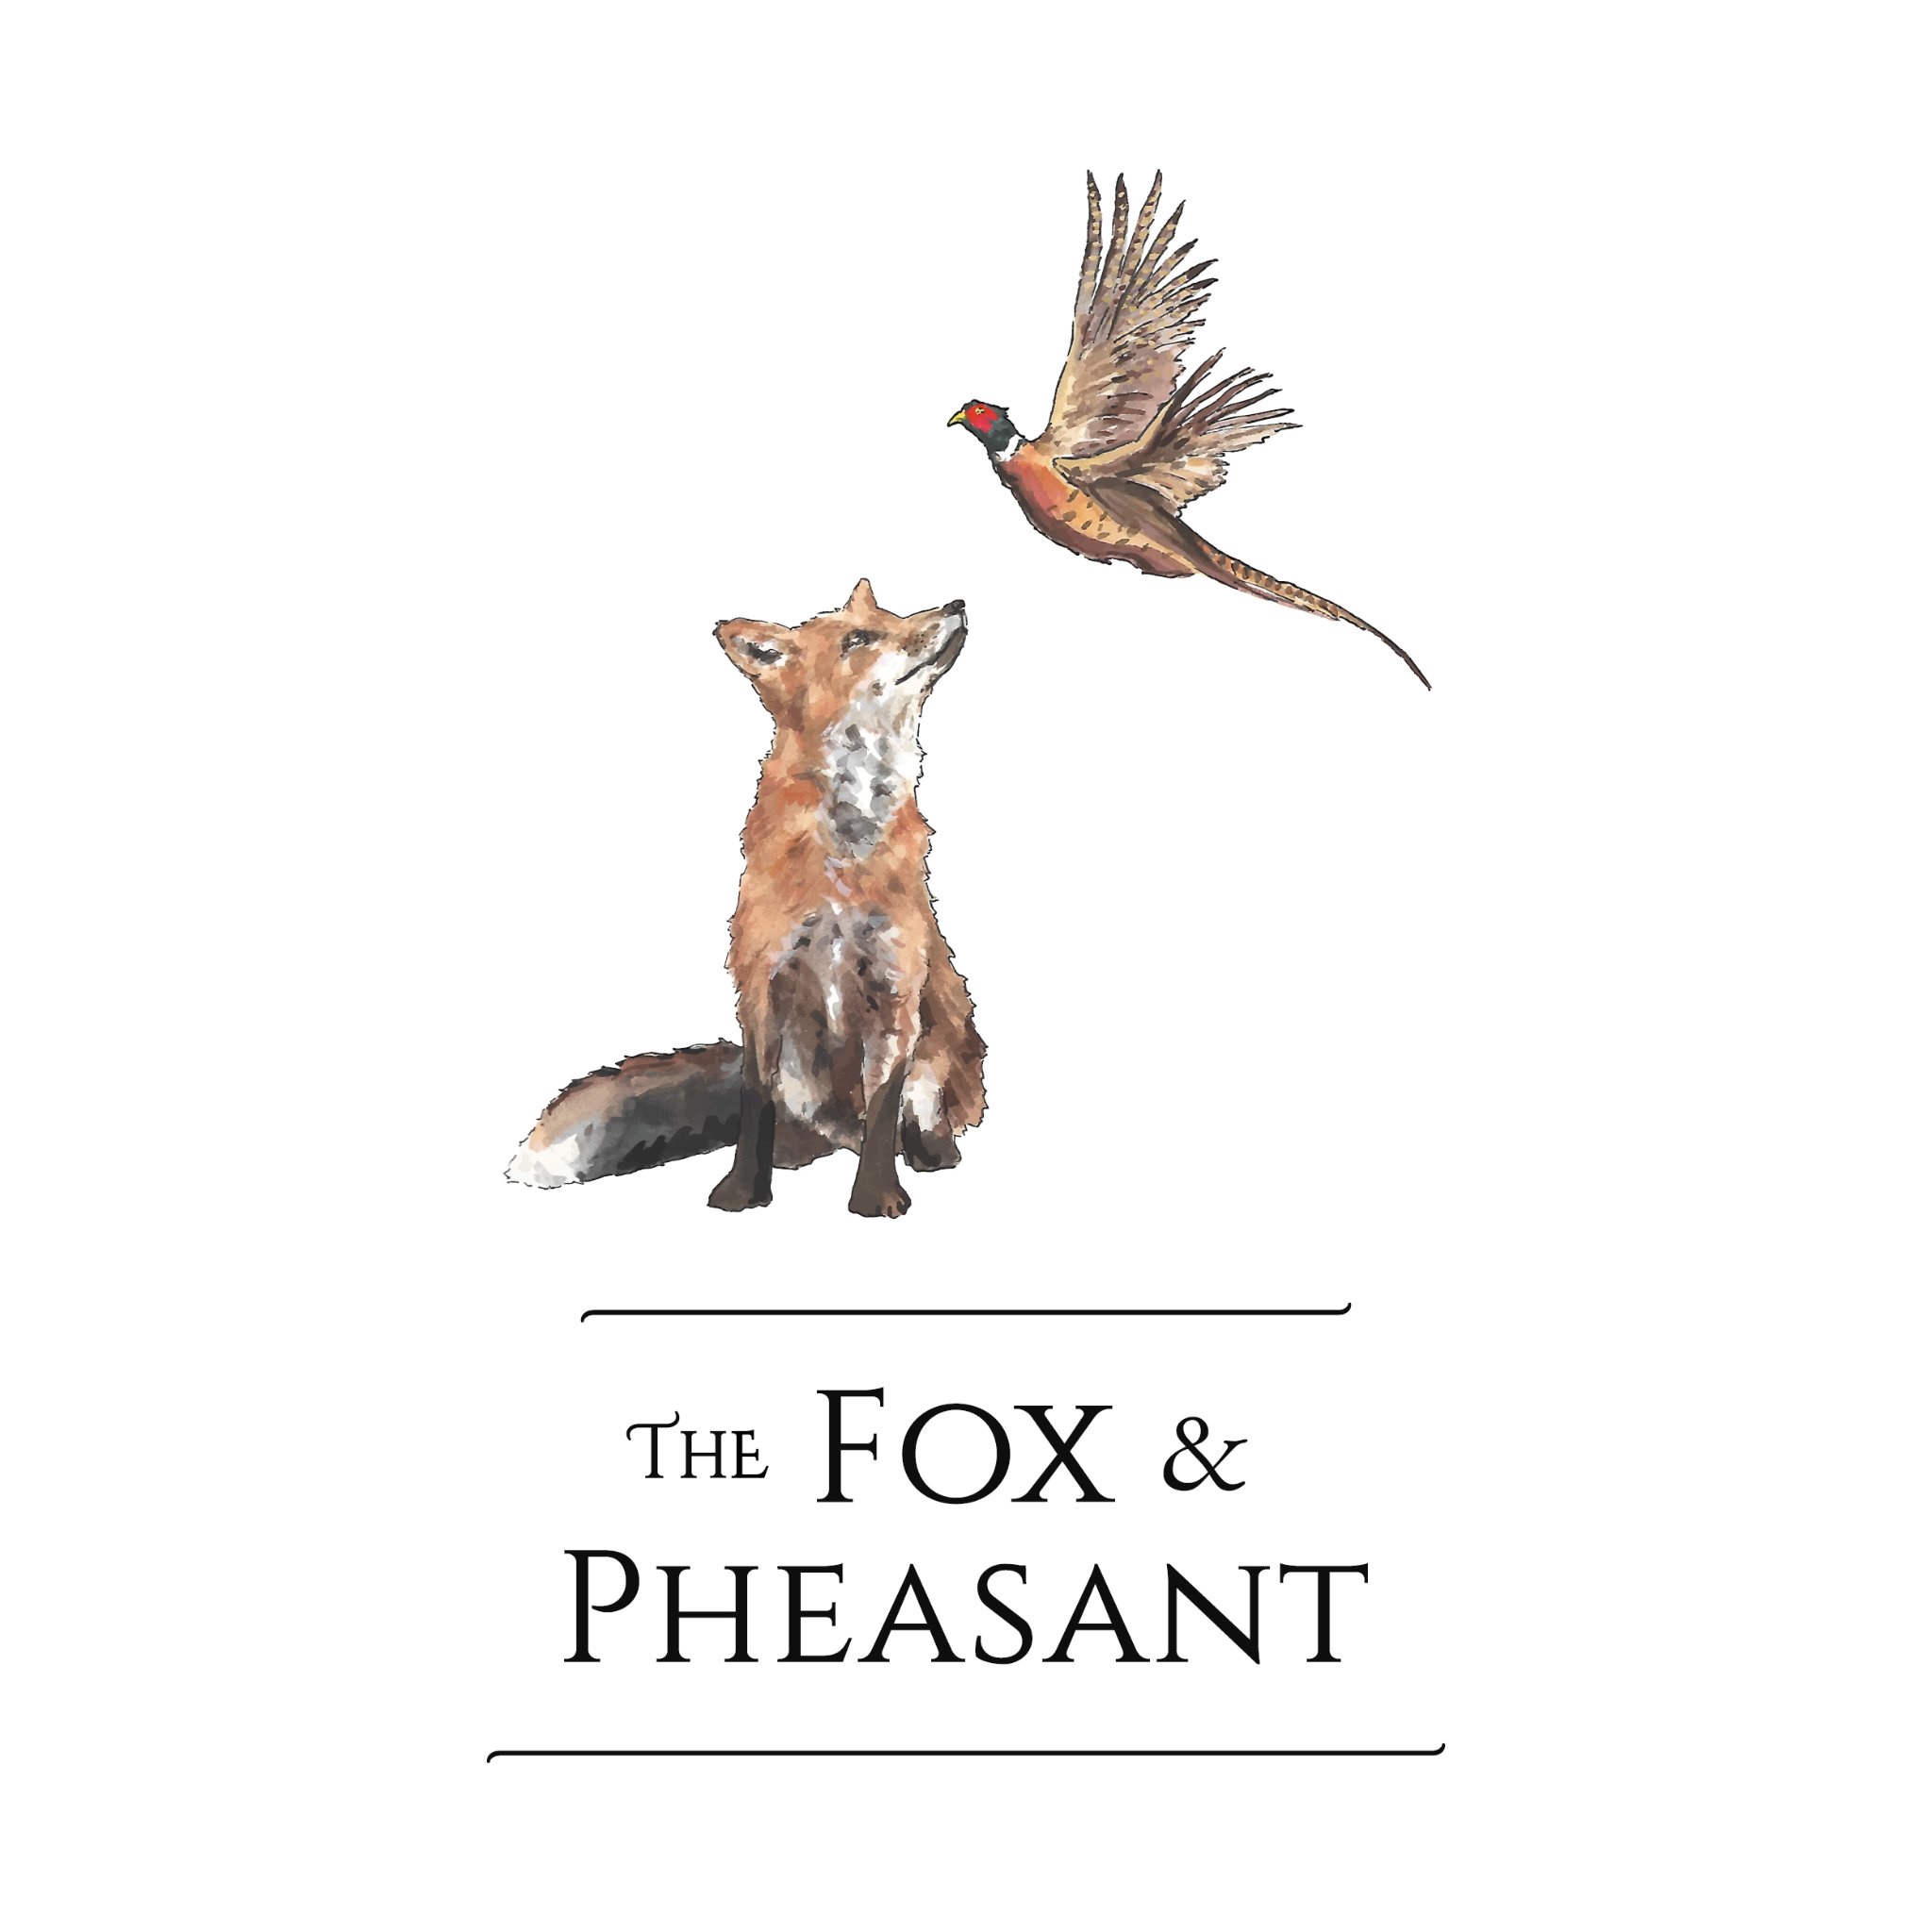 For reservations, Tel.: 0207 352 2943 or Email: enquiries@thefoxandpheasant.com